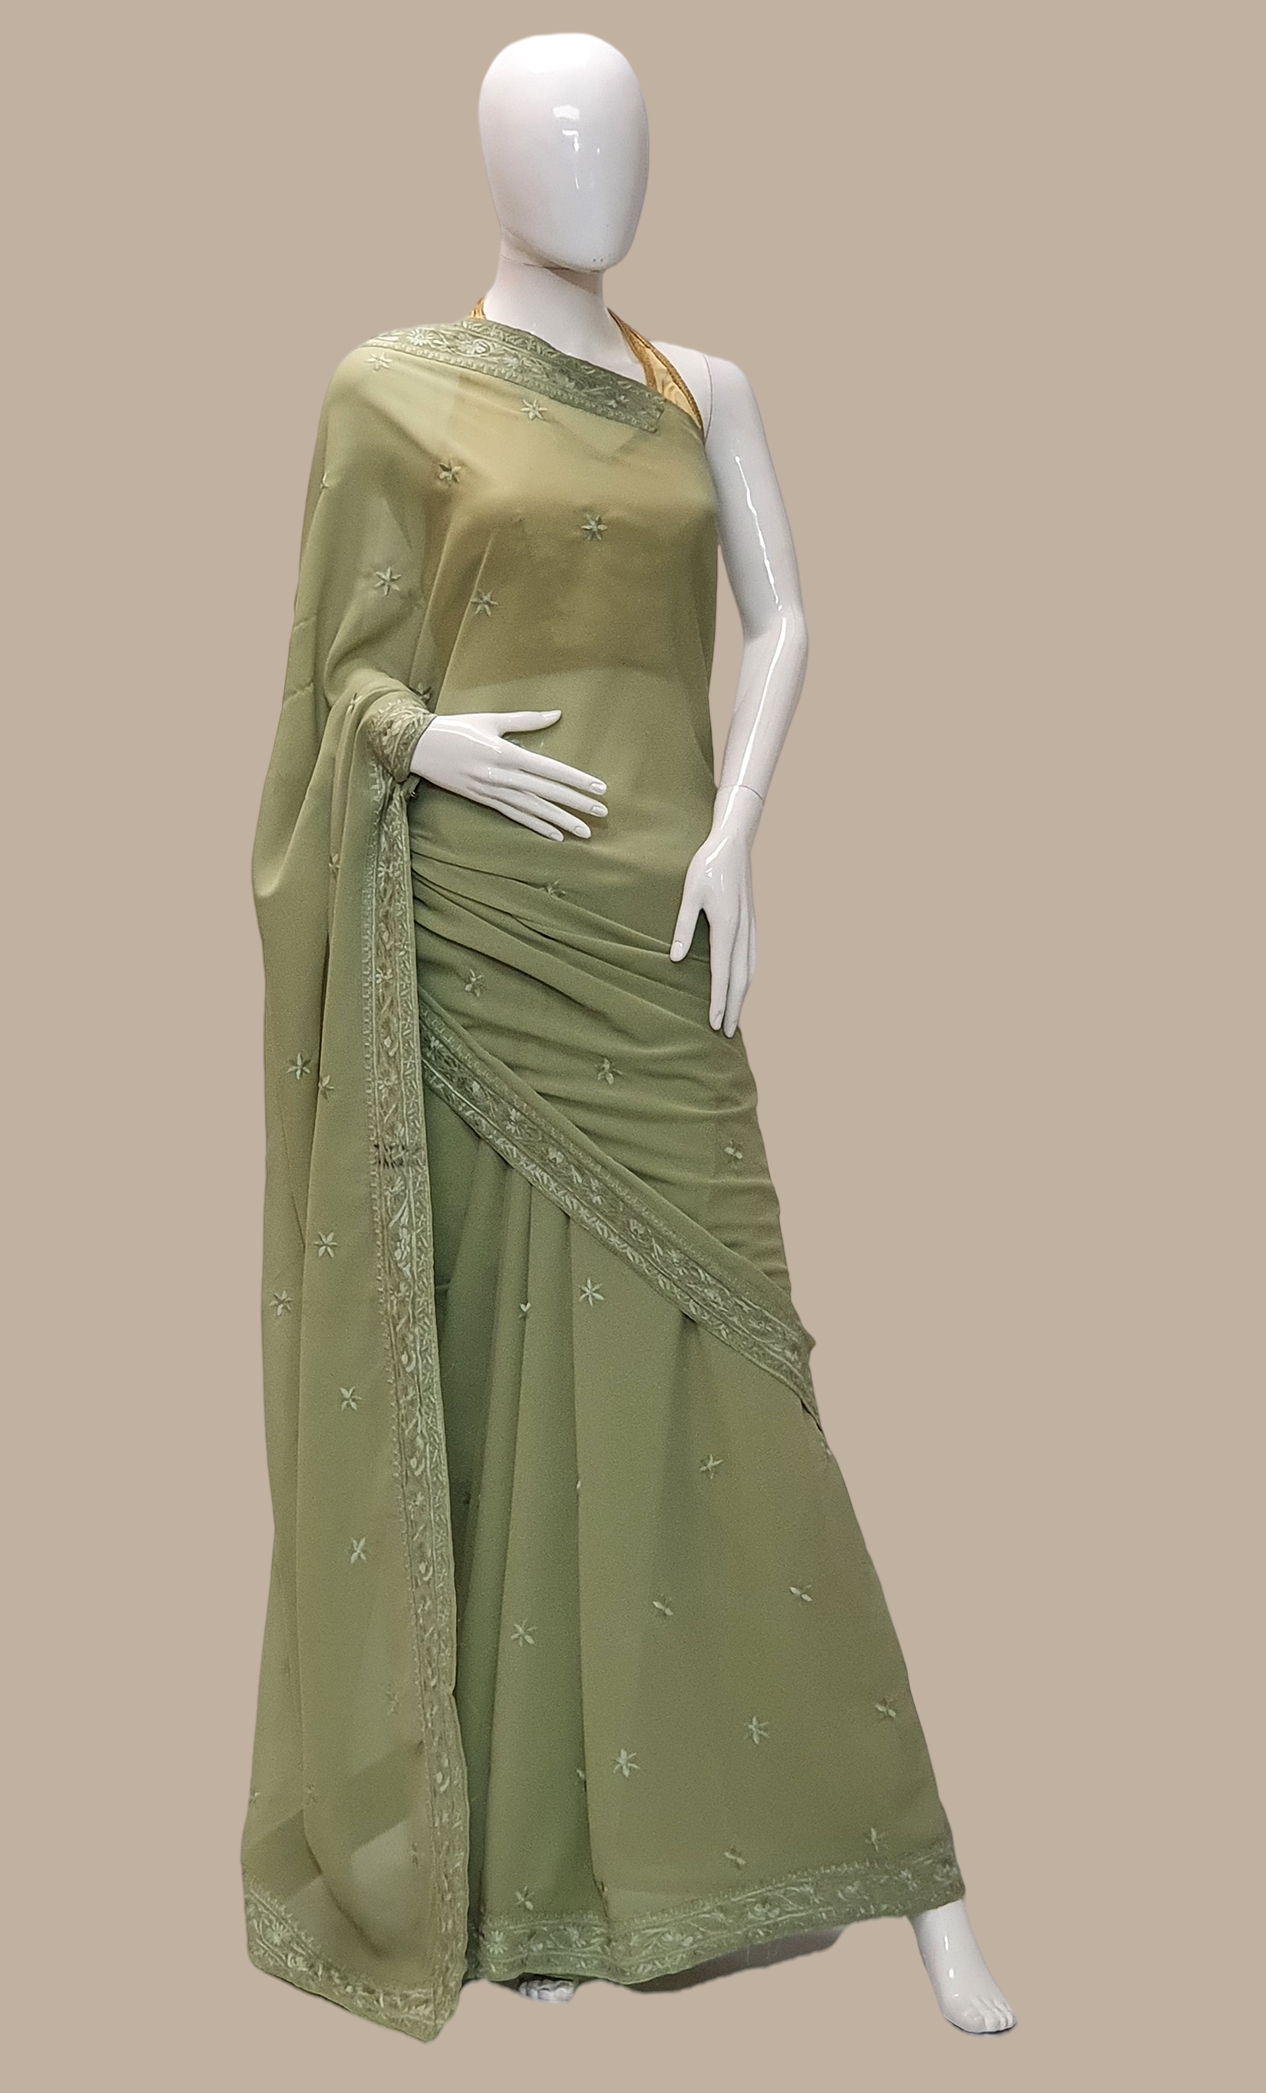 Olive Green Right Hand Embroidered Sari